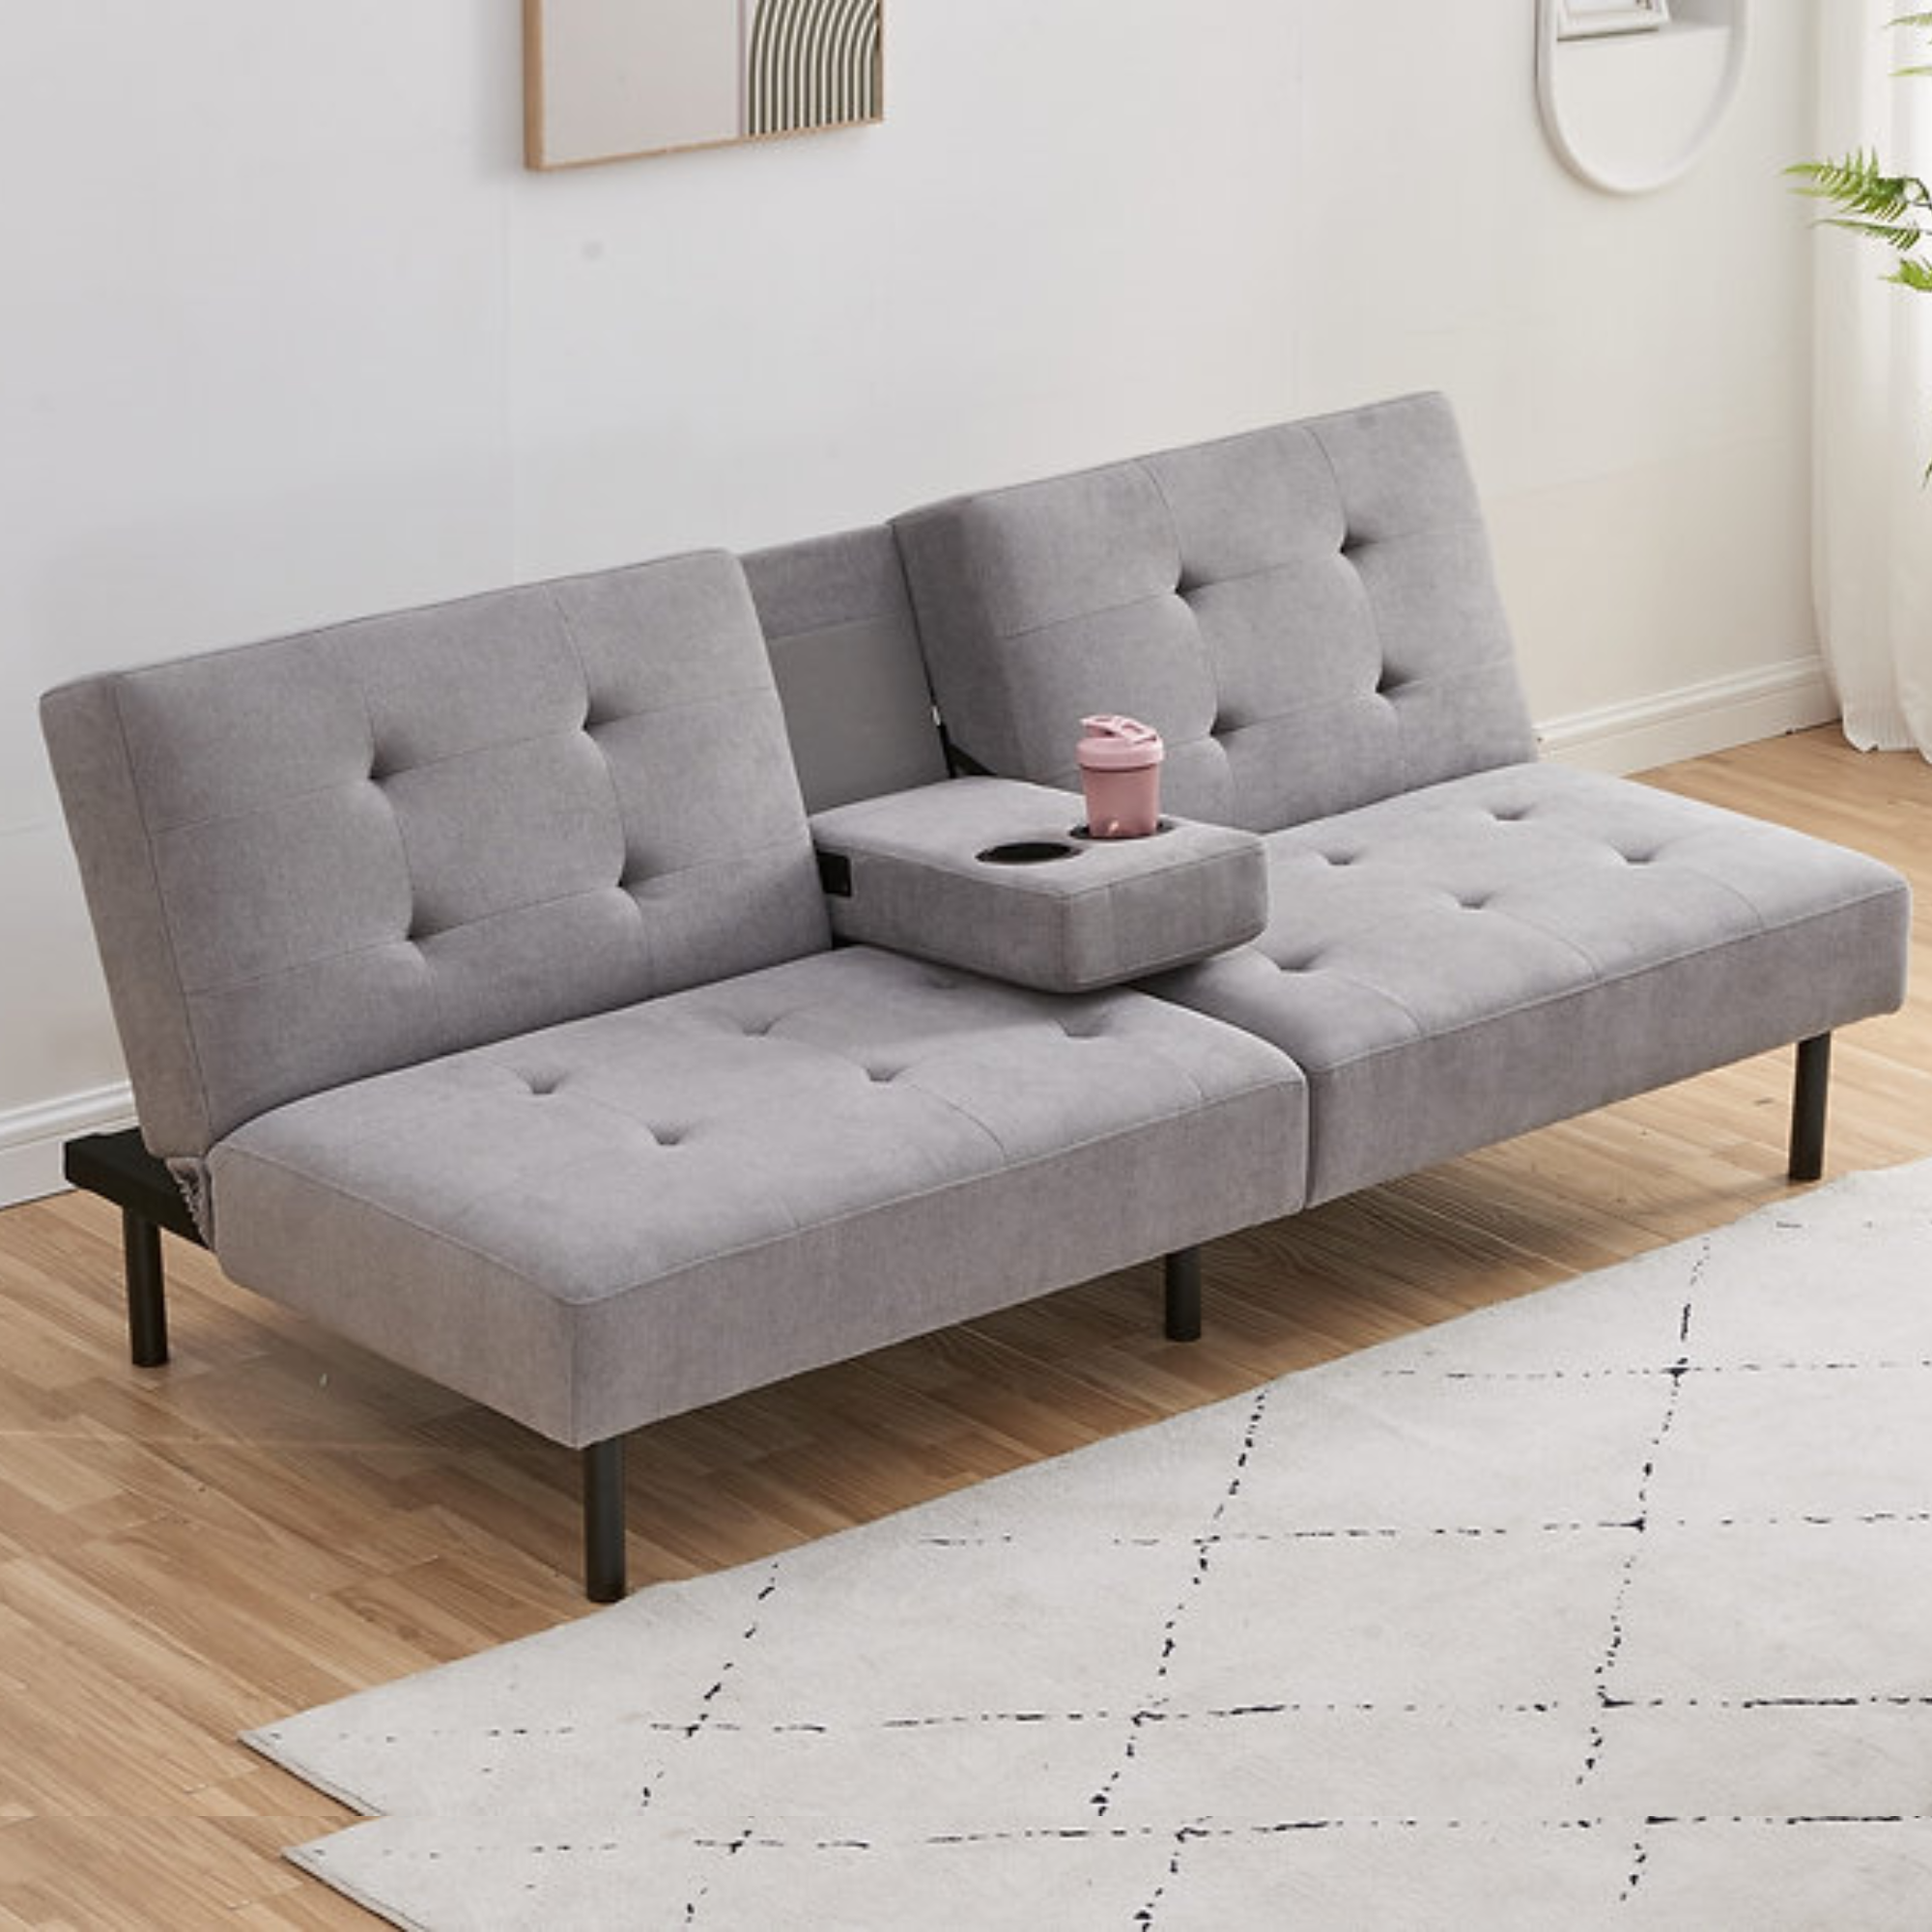 IF-8090 Sofa Bed